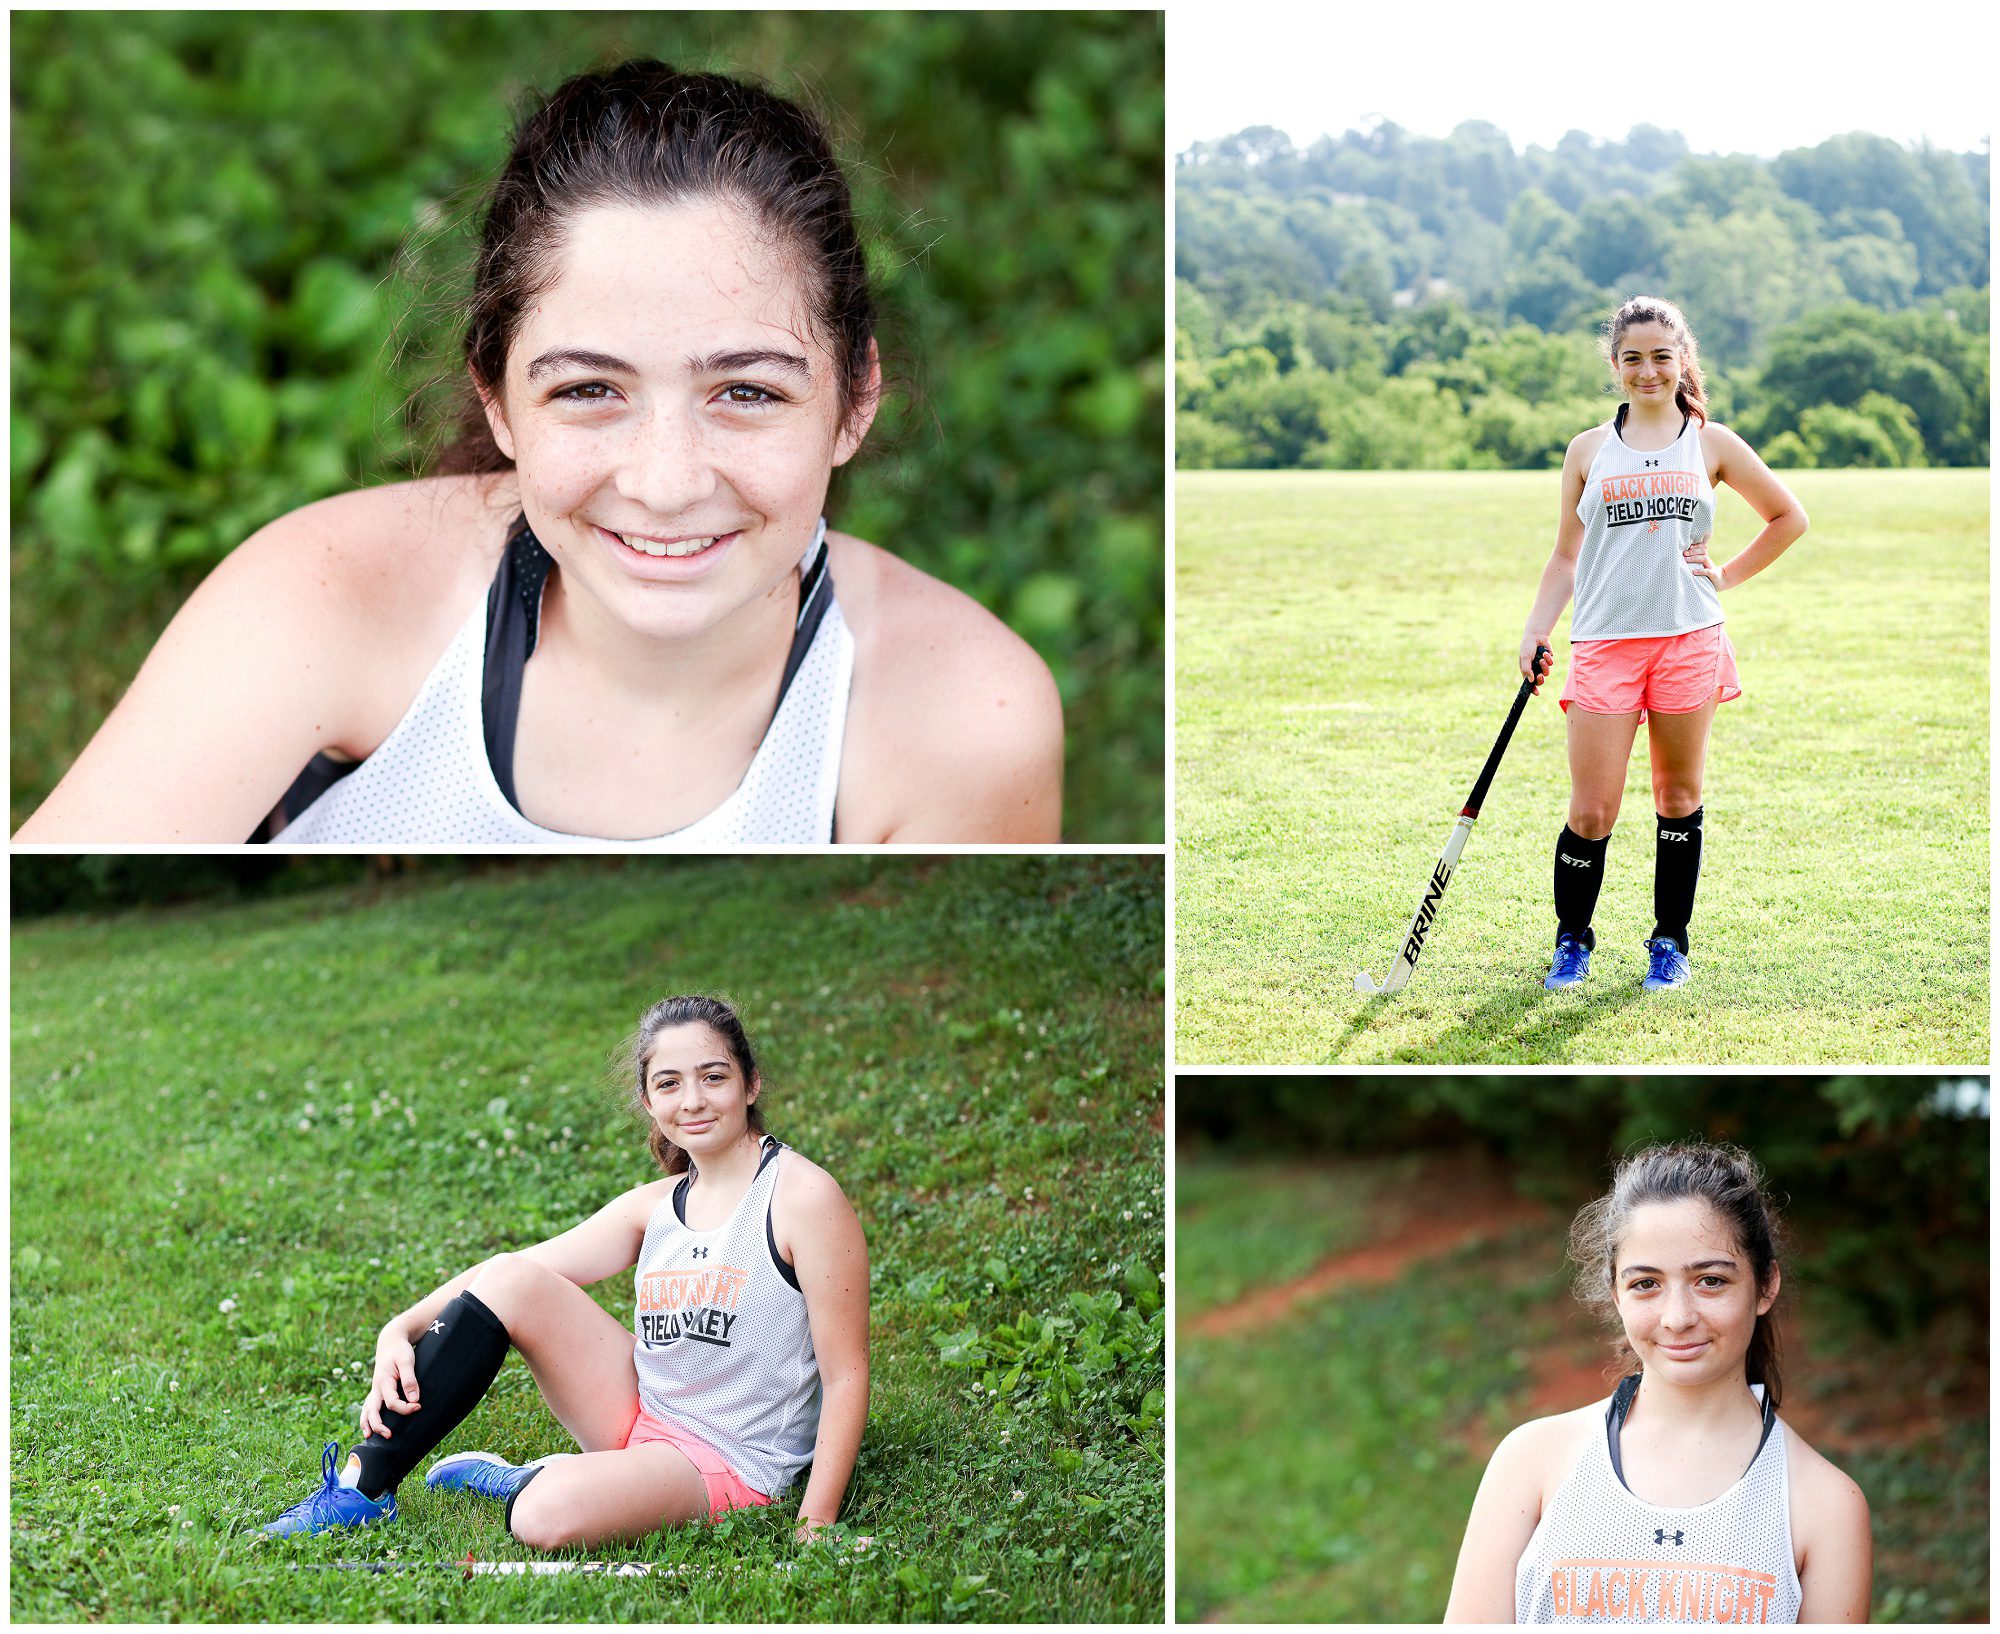 charlottesville high school portraits teenager picturs photographer photography albemarle county central virginia athlete summer sports